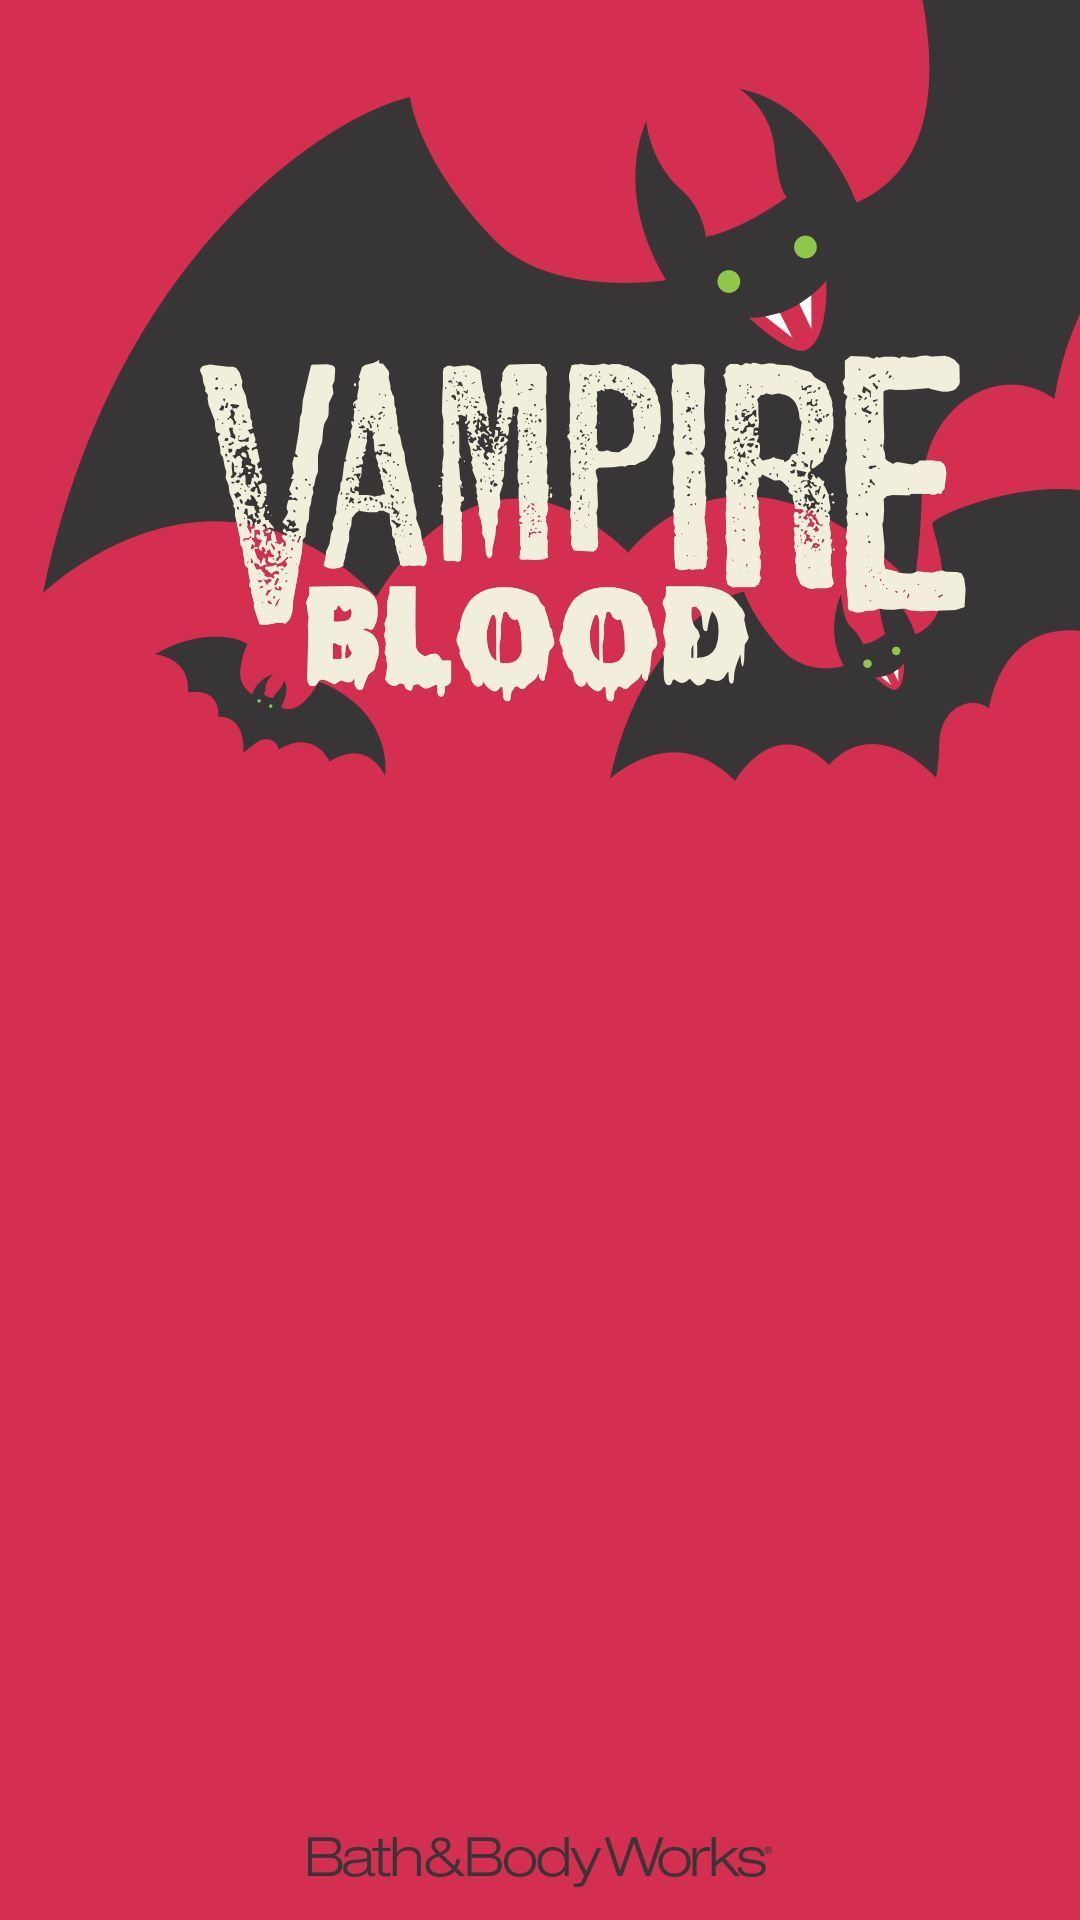 Get ready to be seduced by our new Vampire Blood fragrance. Download our free iPhone wallpaper now. - Vampire